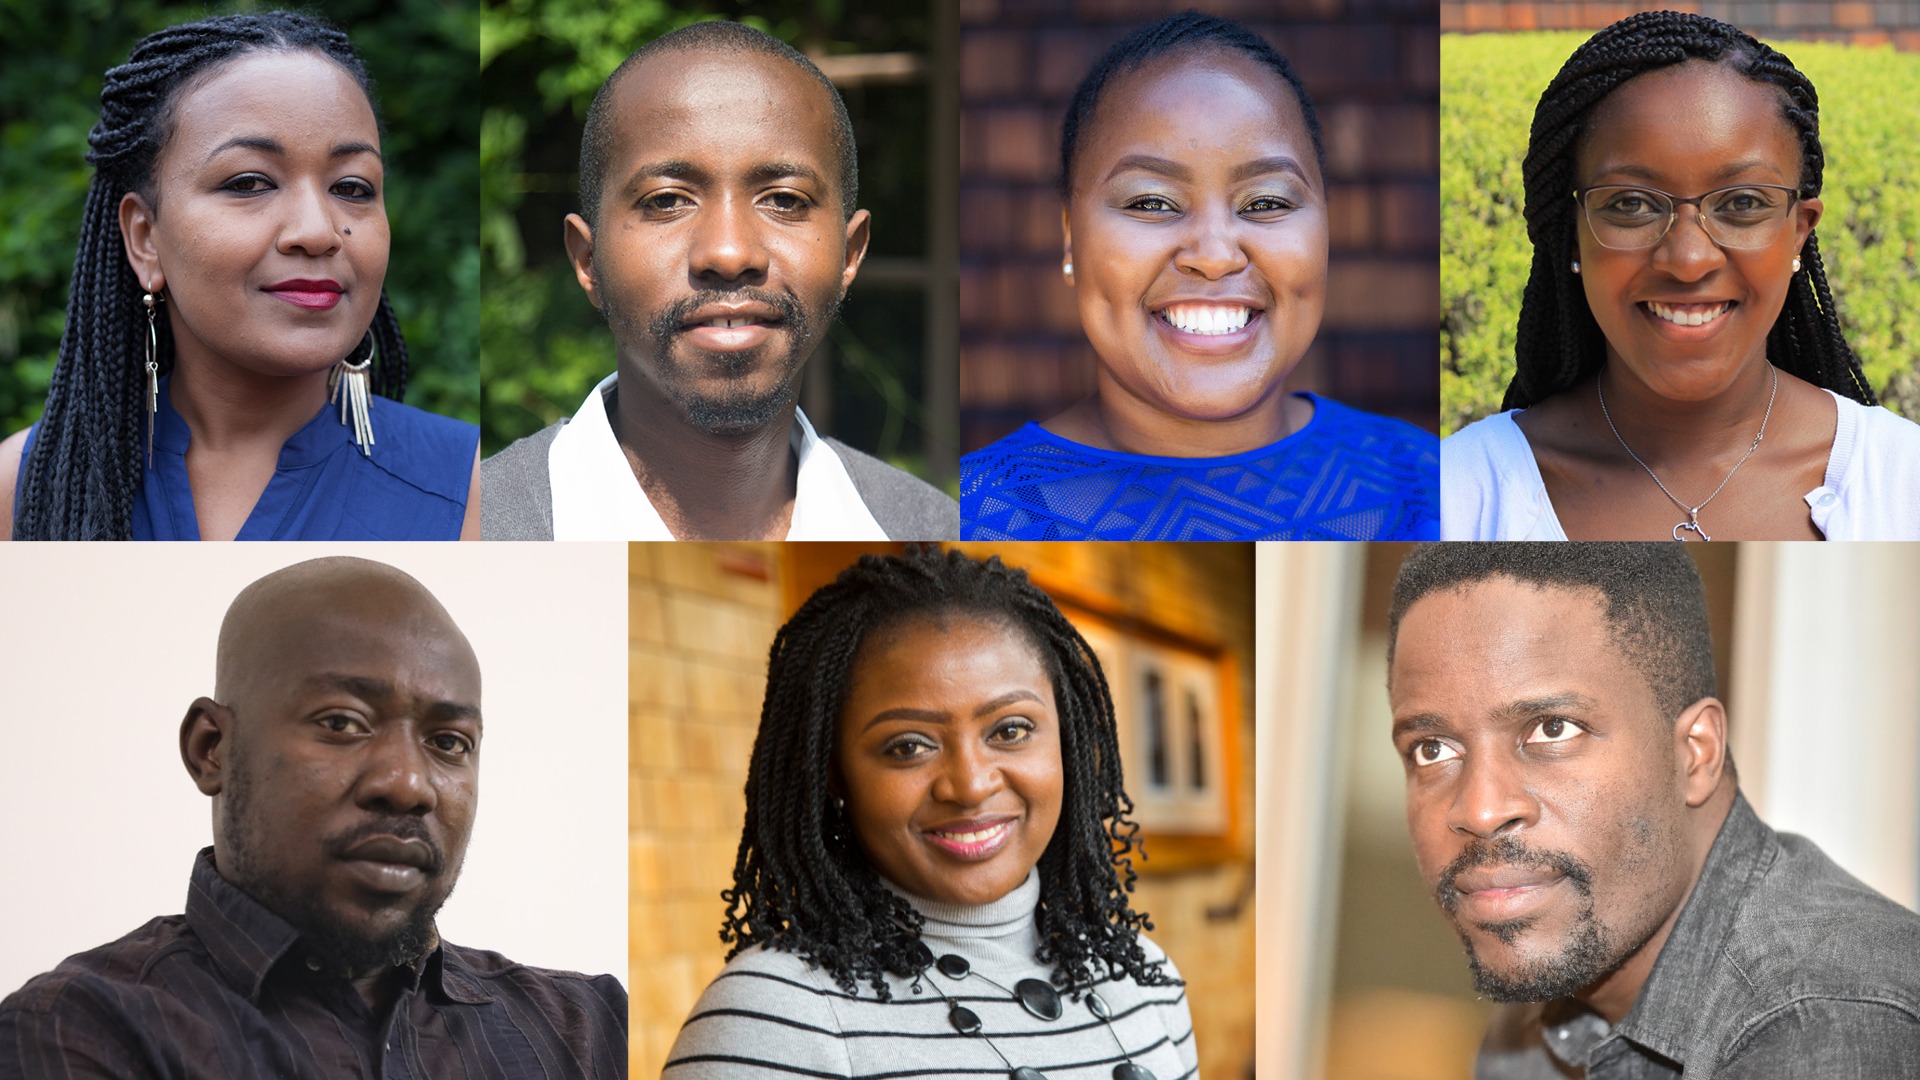 A collage of seven people, four in the top row and three in the bottom row, smiling at the camera. Each person has a unique background including outdoor greenery, brick walls, and indoor settings. The individuals display a diversity of attire and are of African descent—future stars of Berkeley Journalism.